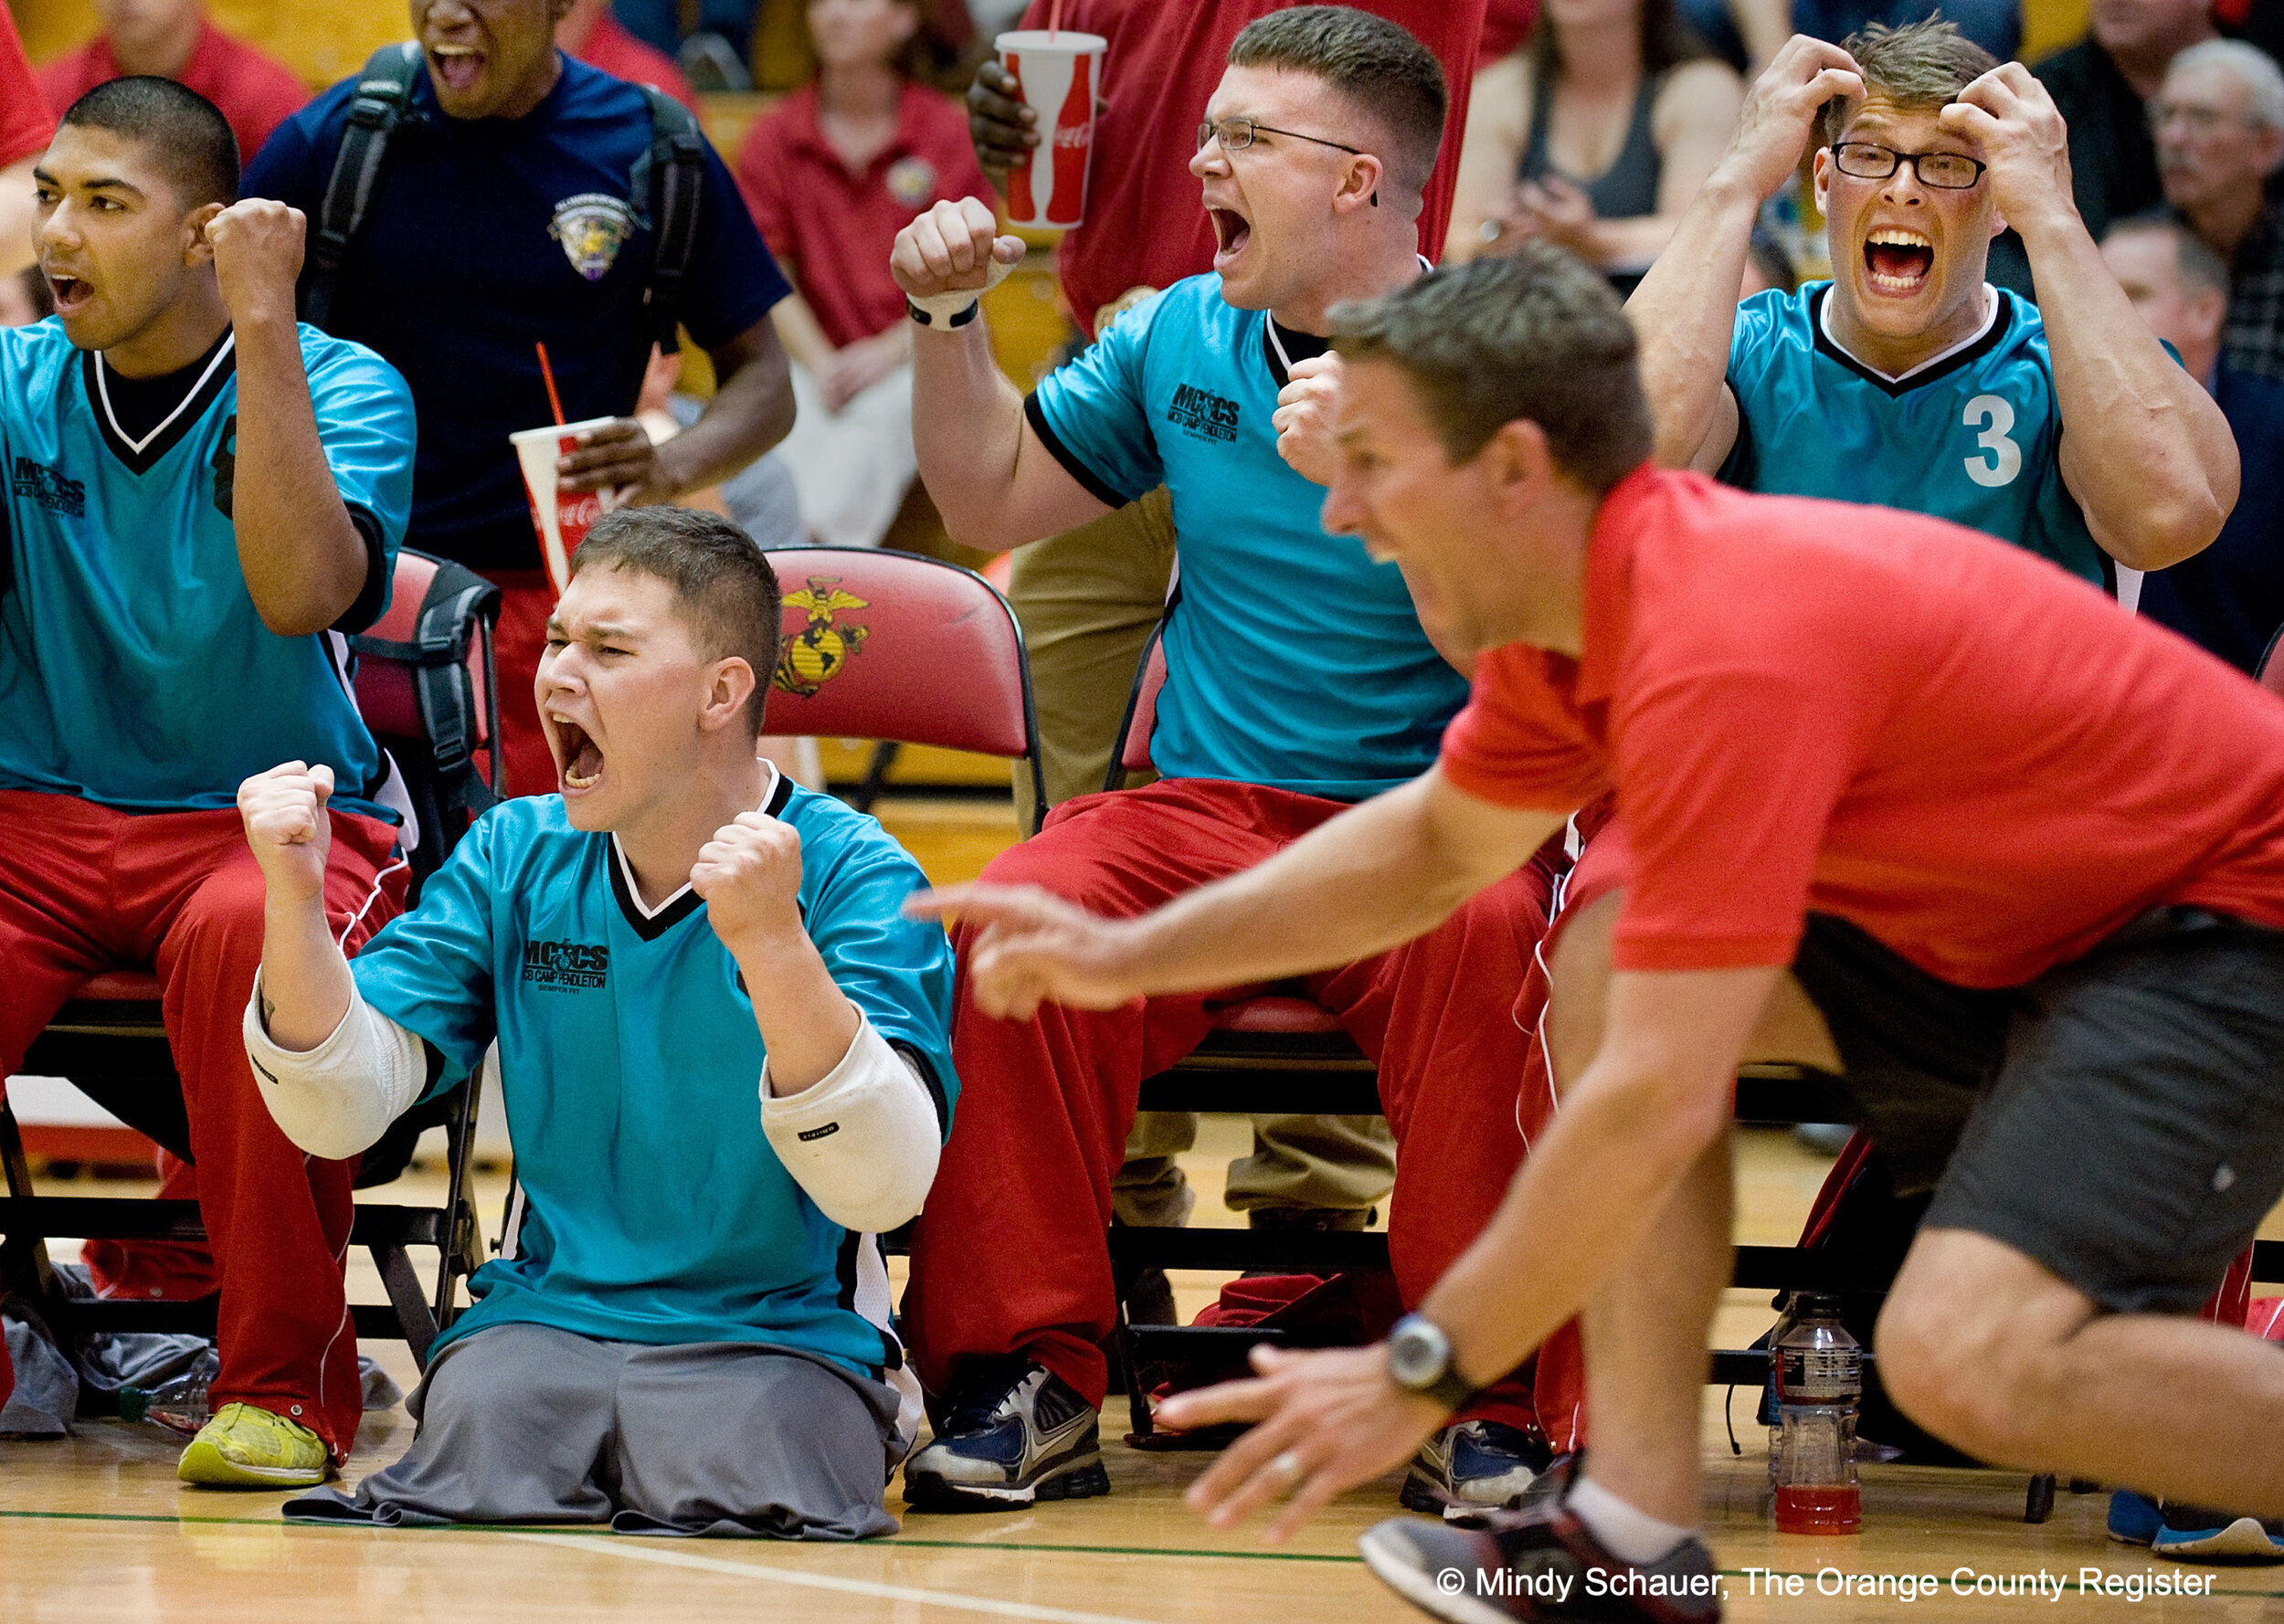  Pfc. Artem Lazukin celebrates winning a gold medal with his team, Battalion West, during the Wounded Warrior volleyball games at Camp Pendleton. Lazukin lost both legs when he stepped on an improvised explosive device in Afghanistan in 2011. More th